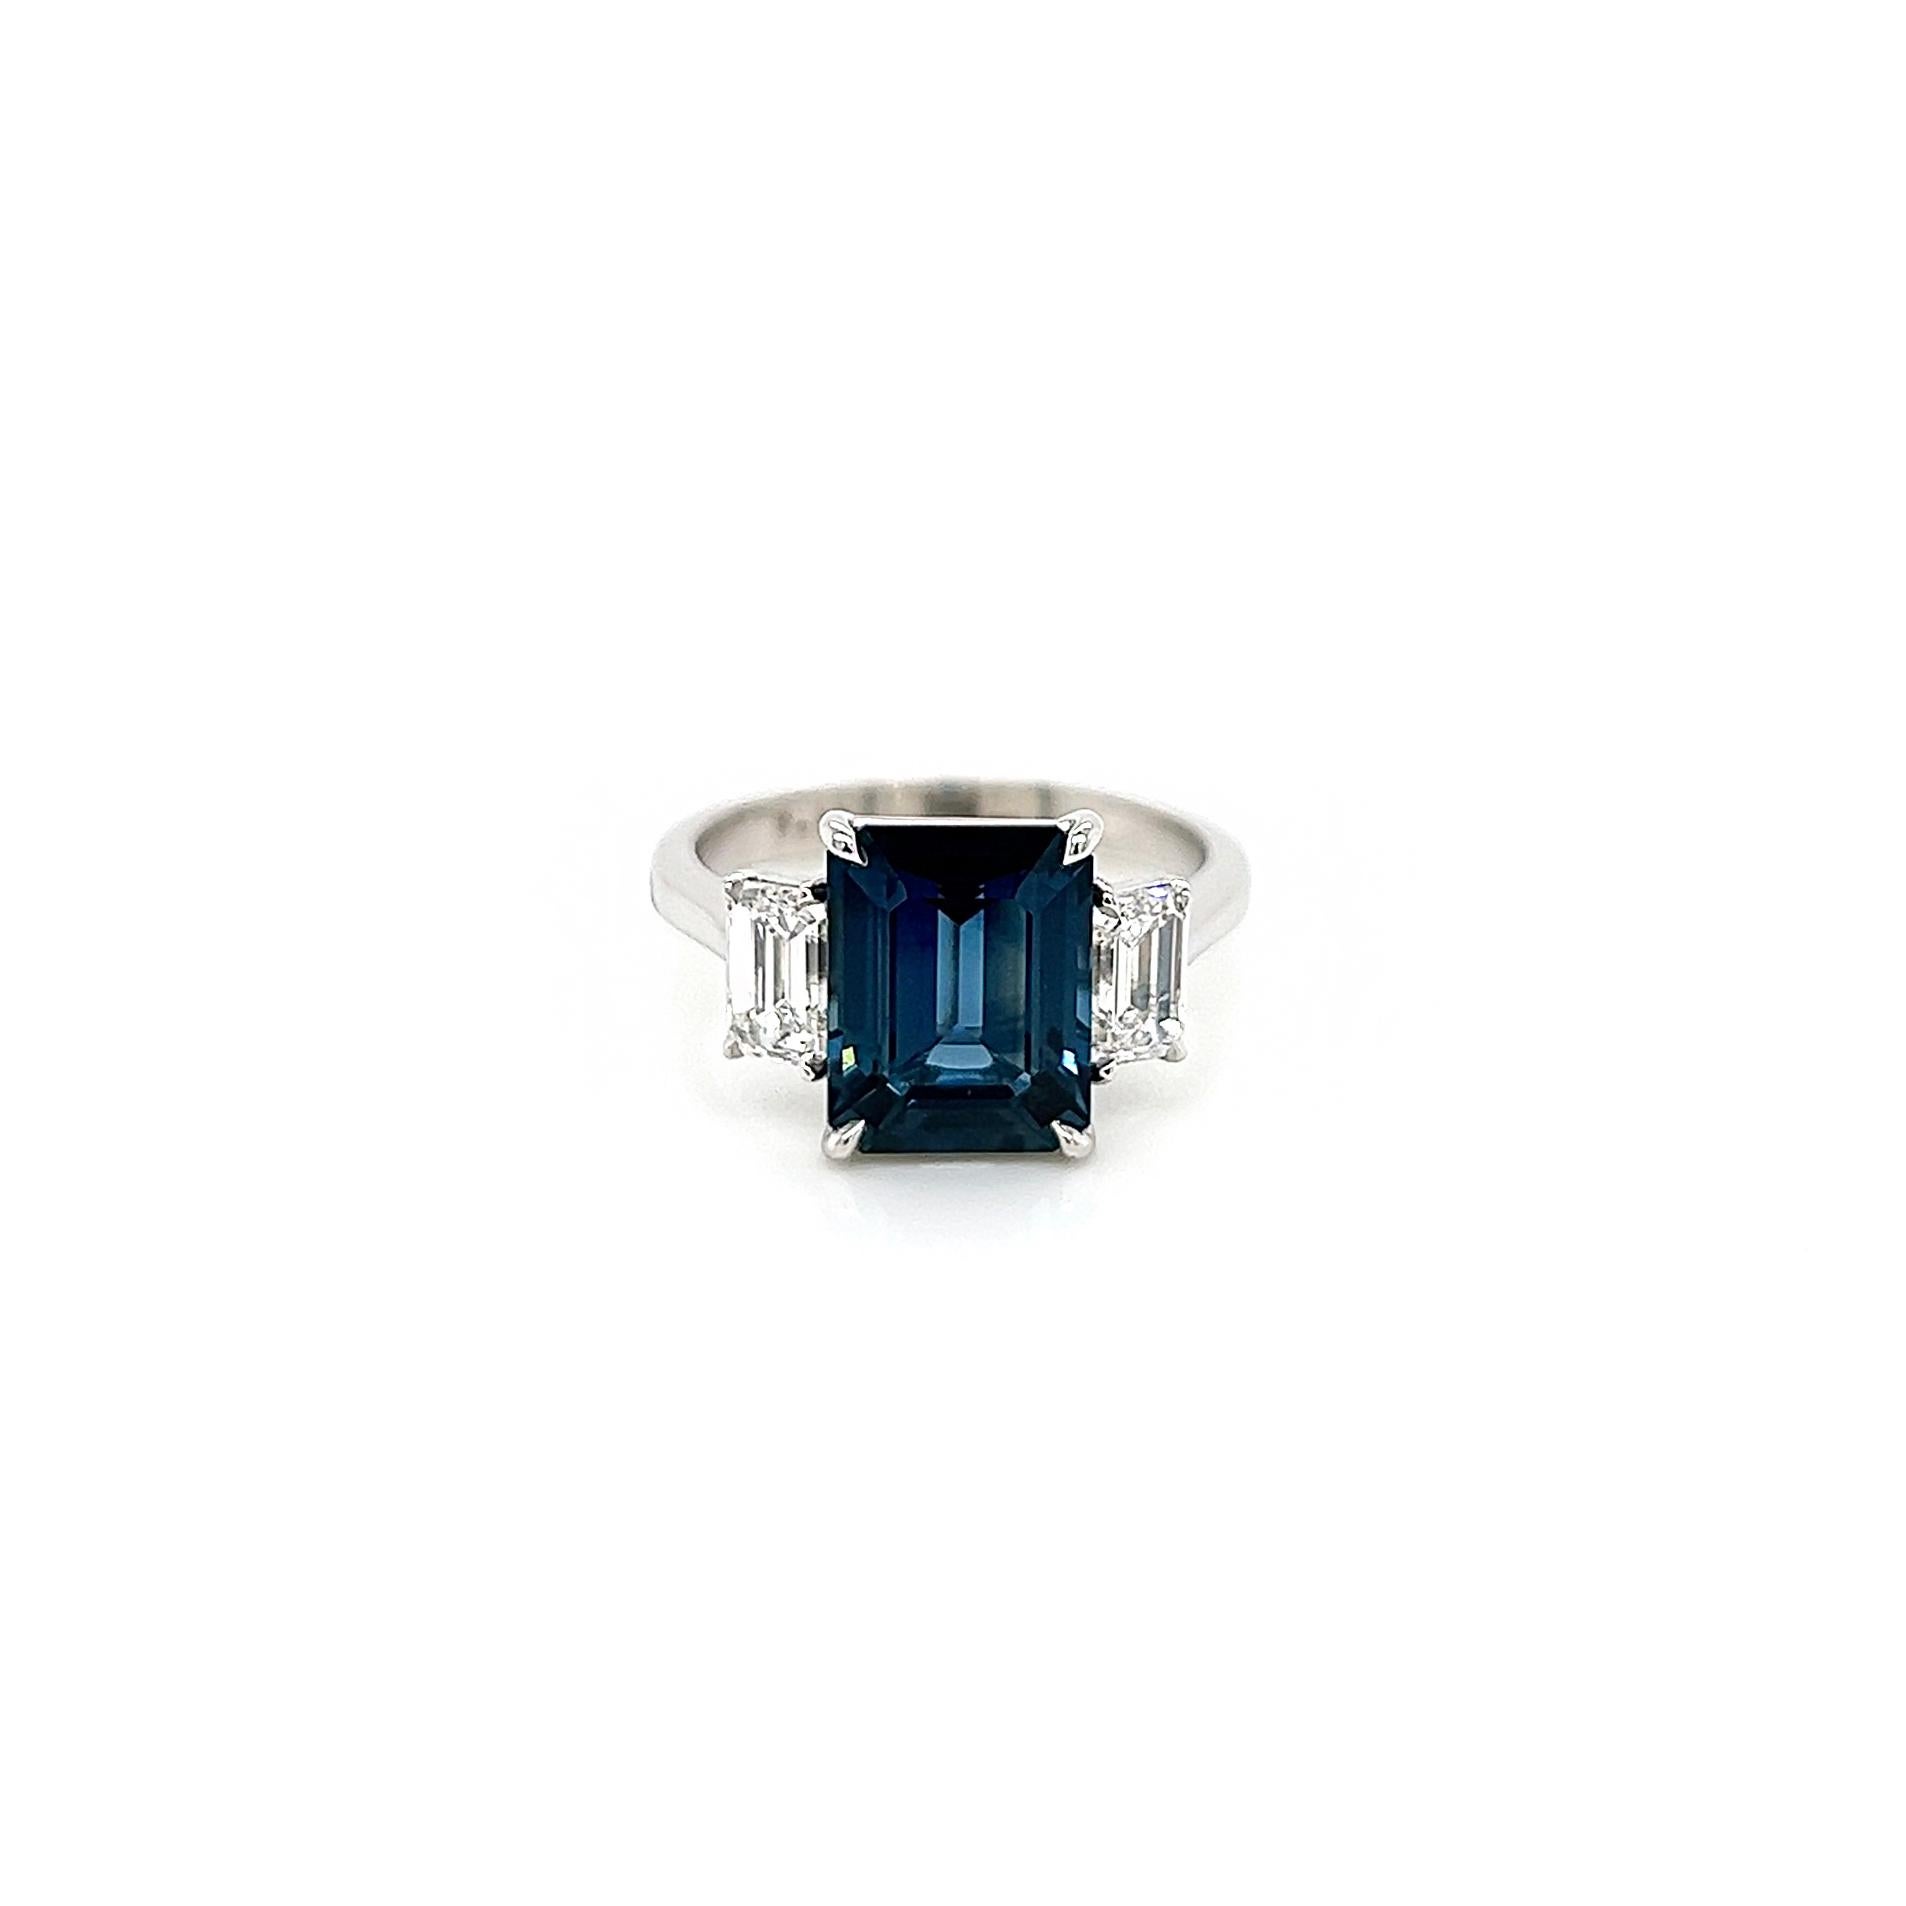 4.65 Total Carat Emerald Cut Sapphire and Diamond Three-Stone Ladies Ring, GIA Certified

-Metal Type: Platinum
-3.72 Carat Emerald Cut Natural Blue Sapphire, GIA Certified 
-0.48 Carat Emerald Cut Natural side Diamond. GIA Certified (Report: